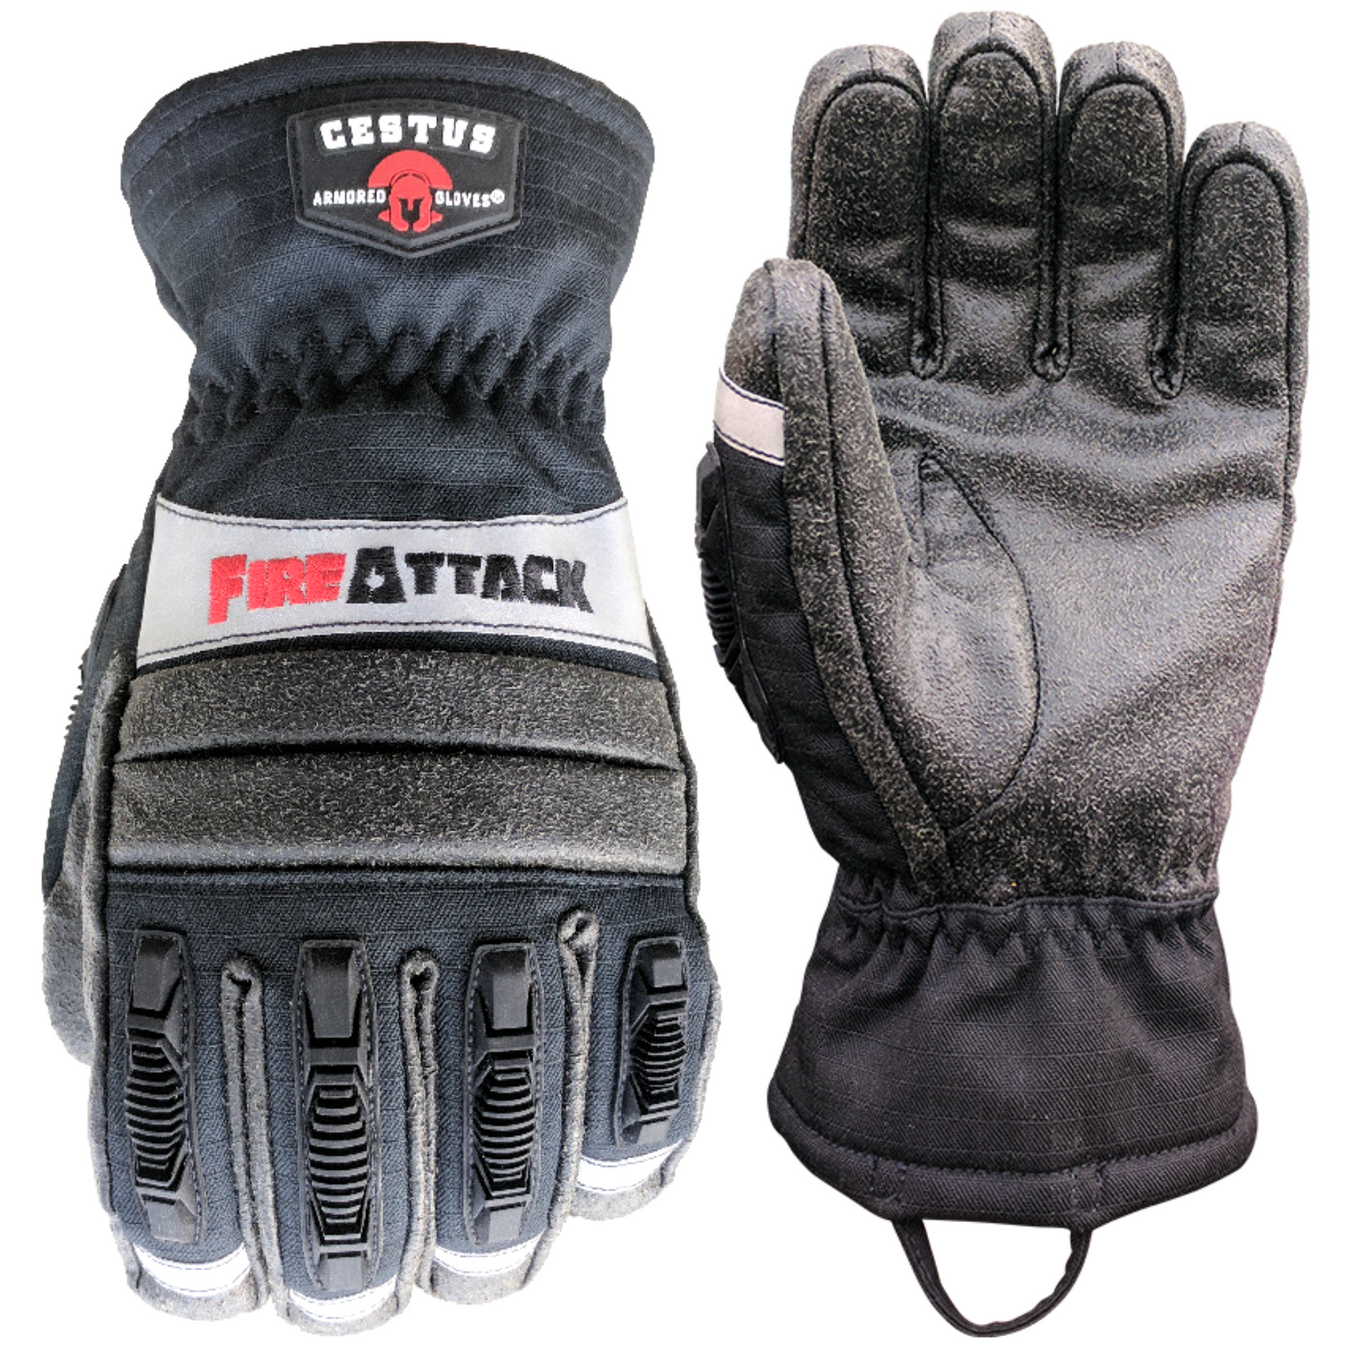 Fire and Rescue Gloves